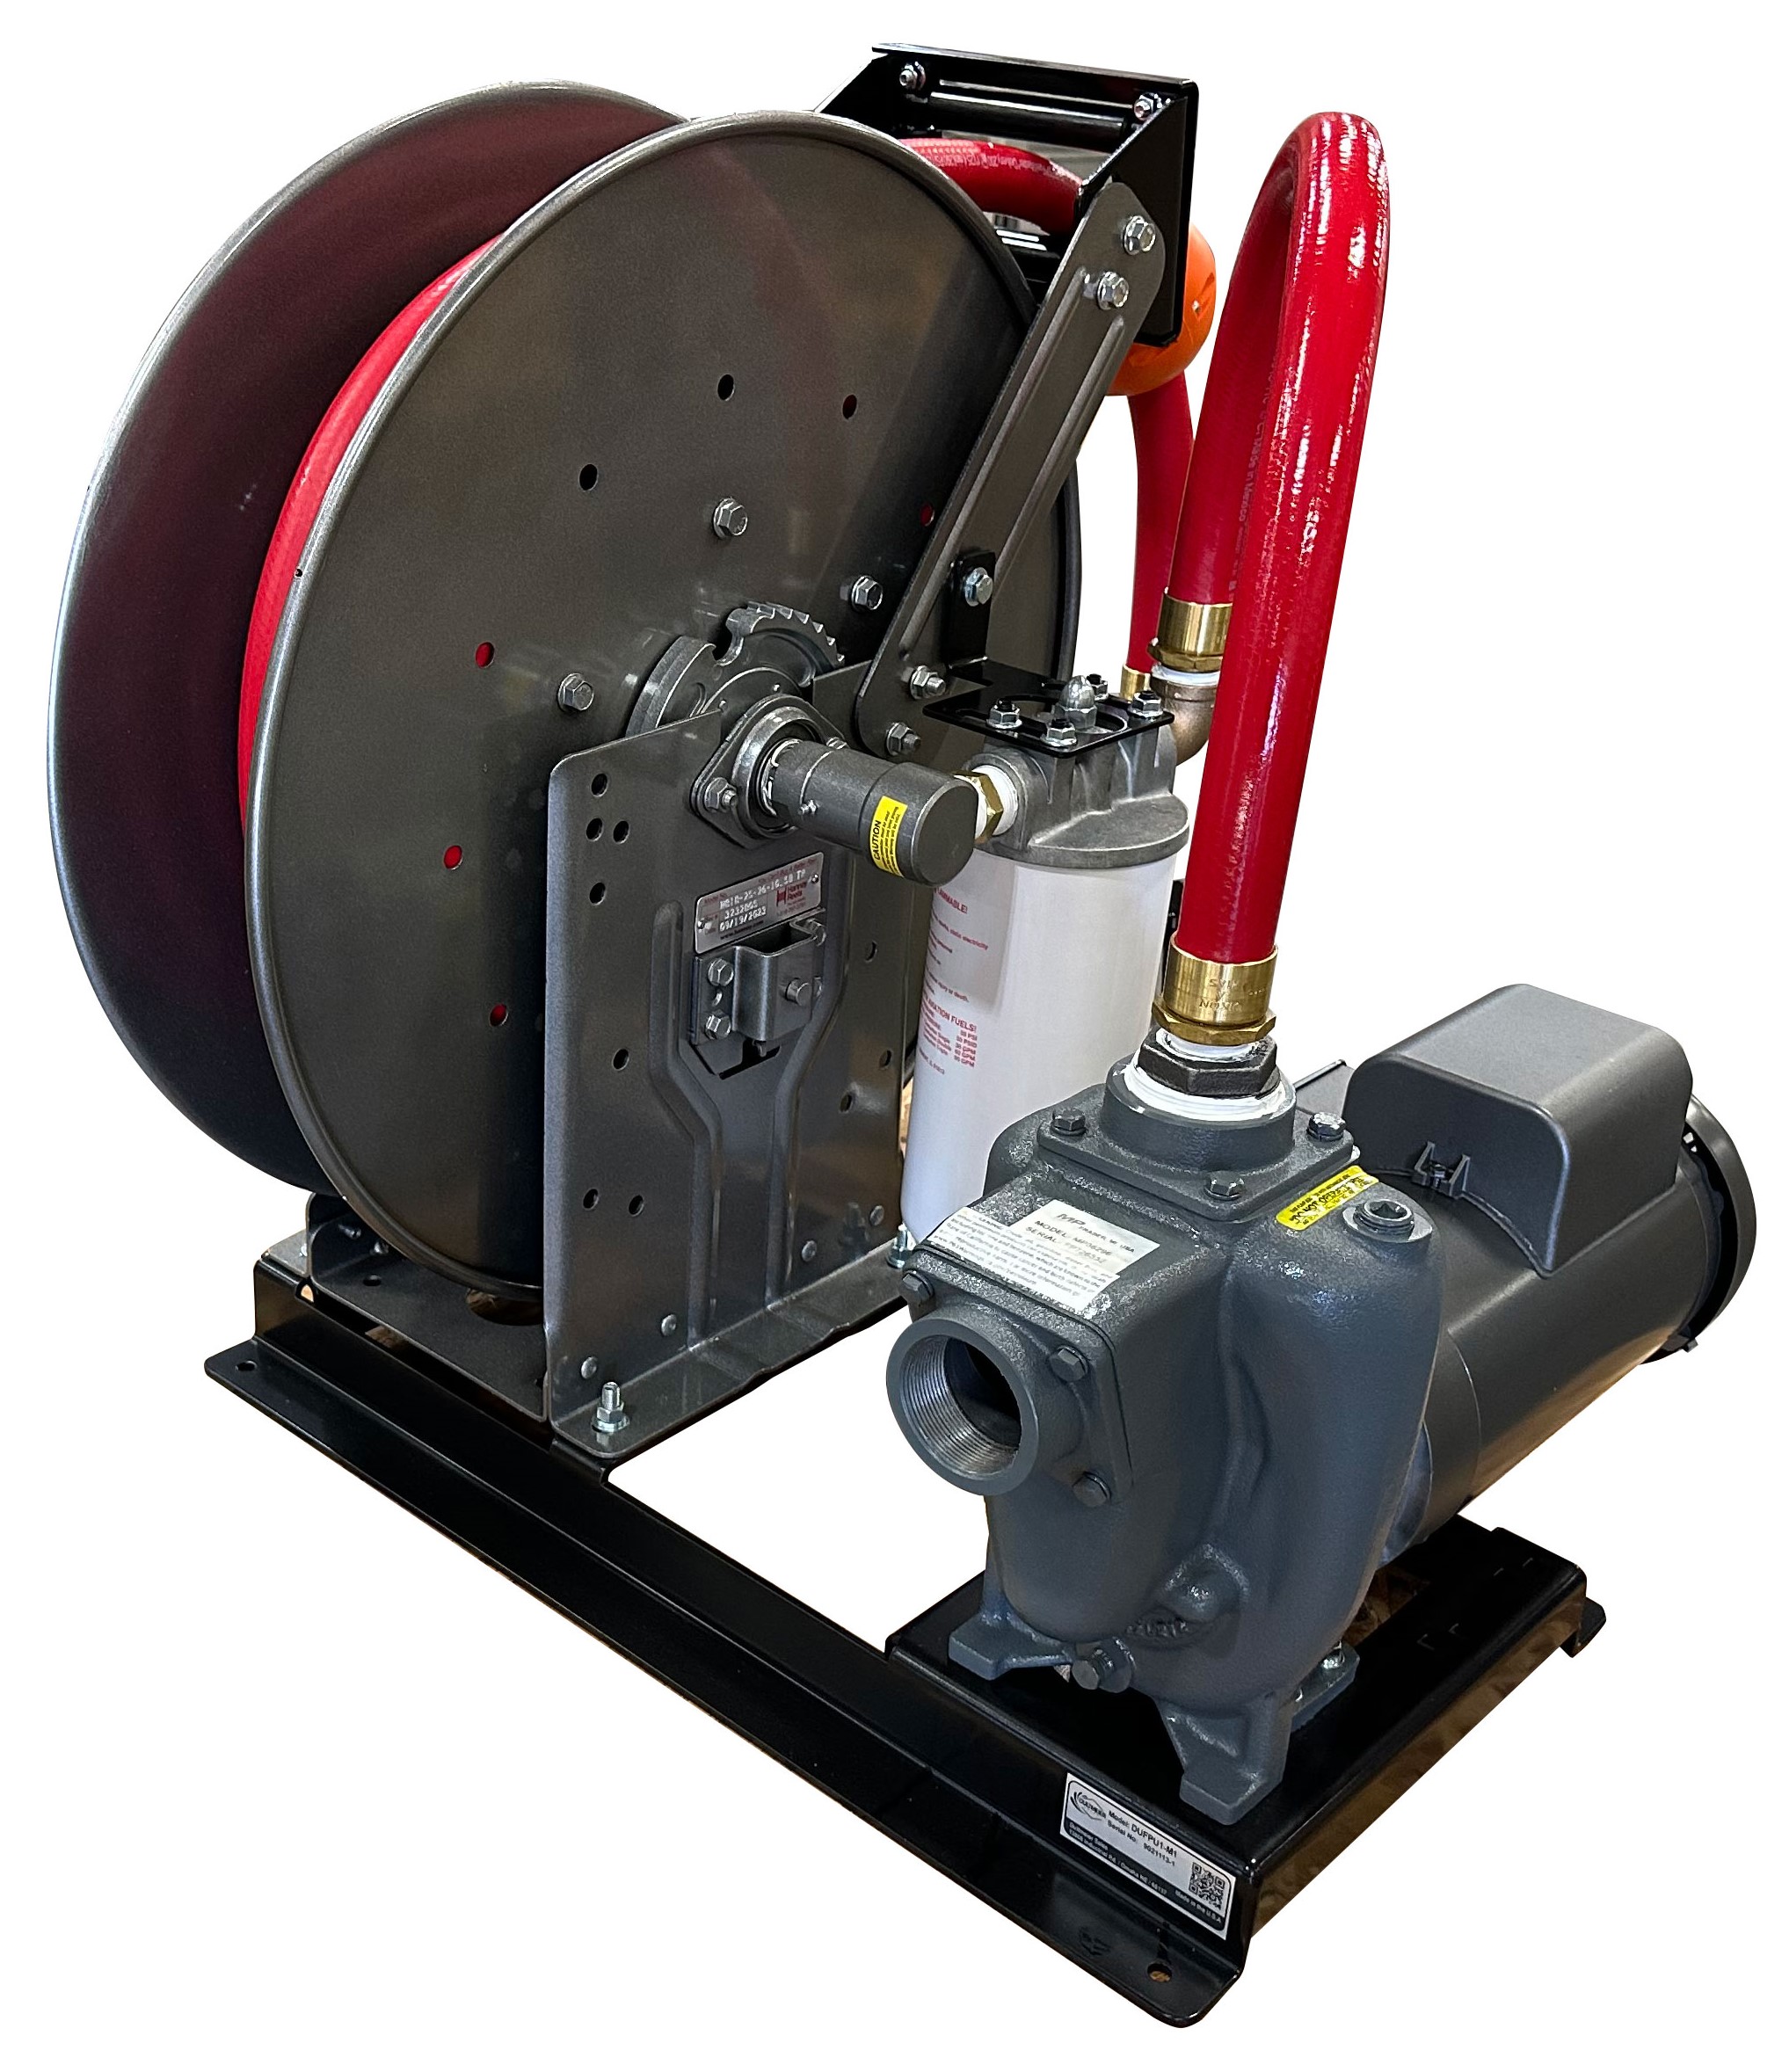 Picture of High Volume Diesel Fuel Transfer Pump Unit, 1" x 38 ft. Hose, 32 GPM Flowrate, 3 HP, 1 PH Motor